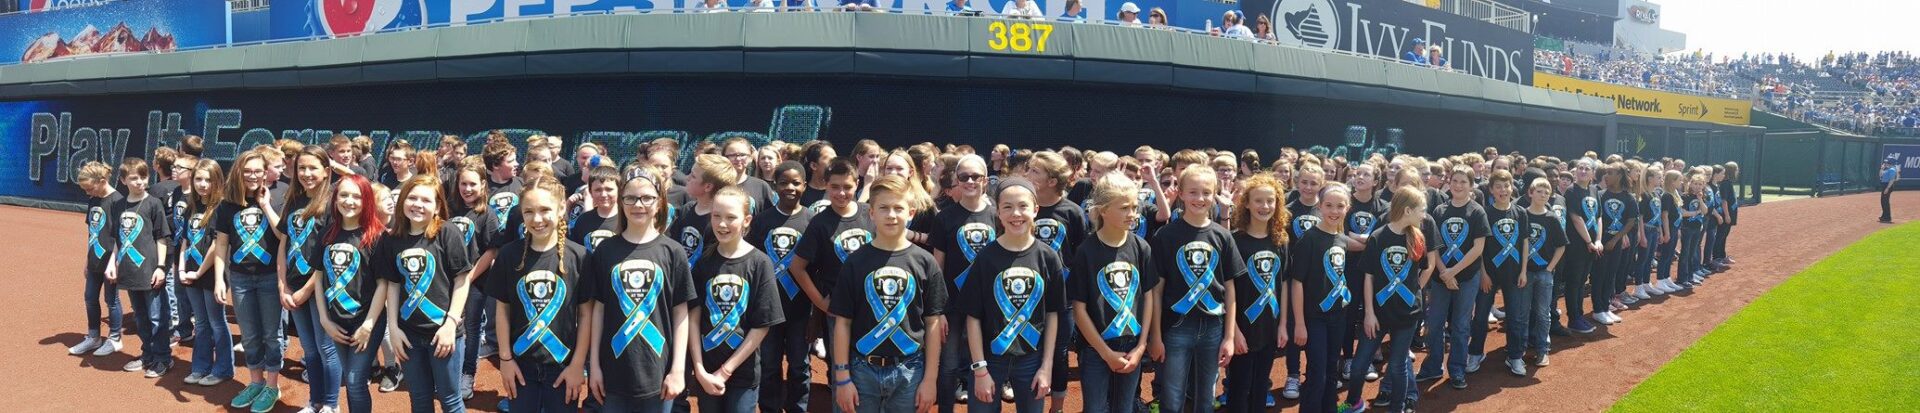 A large group of people wearing a black shirt with a blue ribbon print  